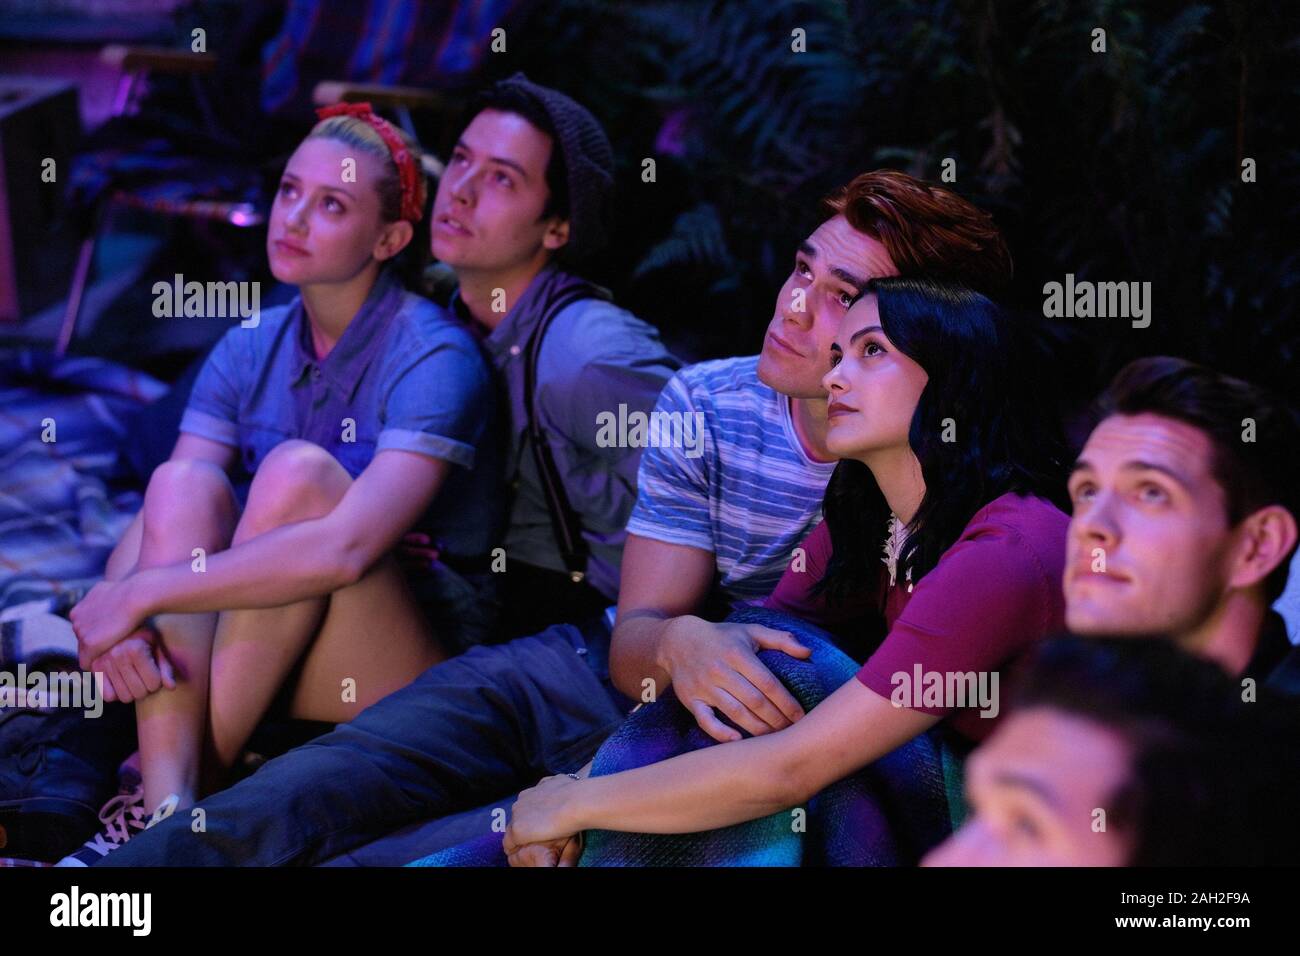 COLE SPROUSE, KJ APA, LILI REINHART, CAMILA MENDES and CASEY COTT in RIVERDALE (2017), directed by ROBERTO AGUIRRE-SACASA. Temporada 4 Episodio 1. Credit: CBS TELEVISION / Album Stock Photo